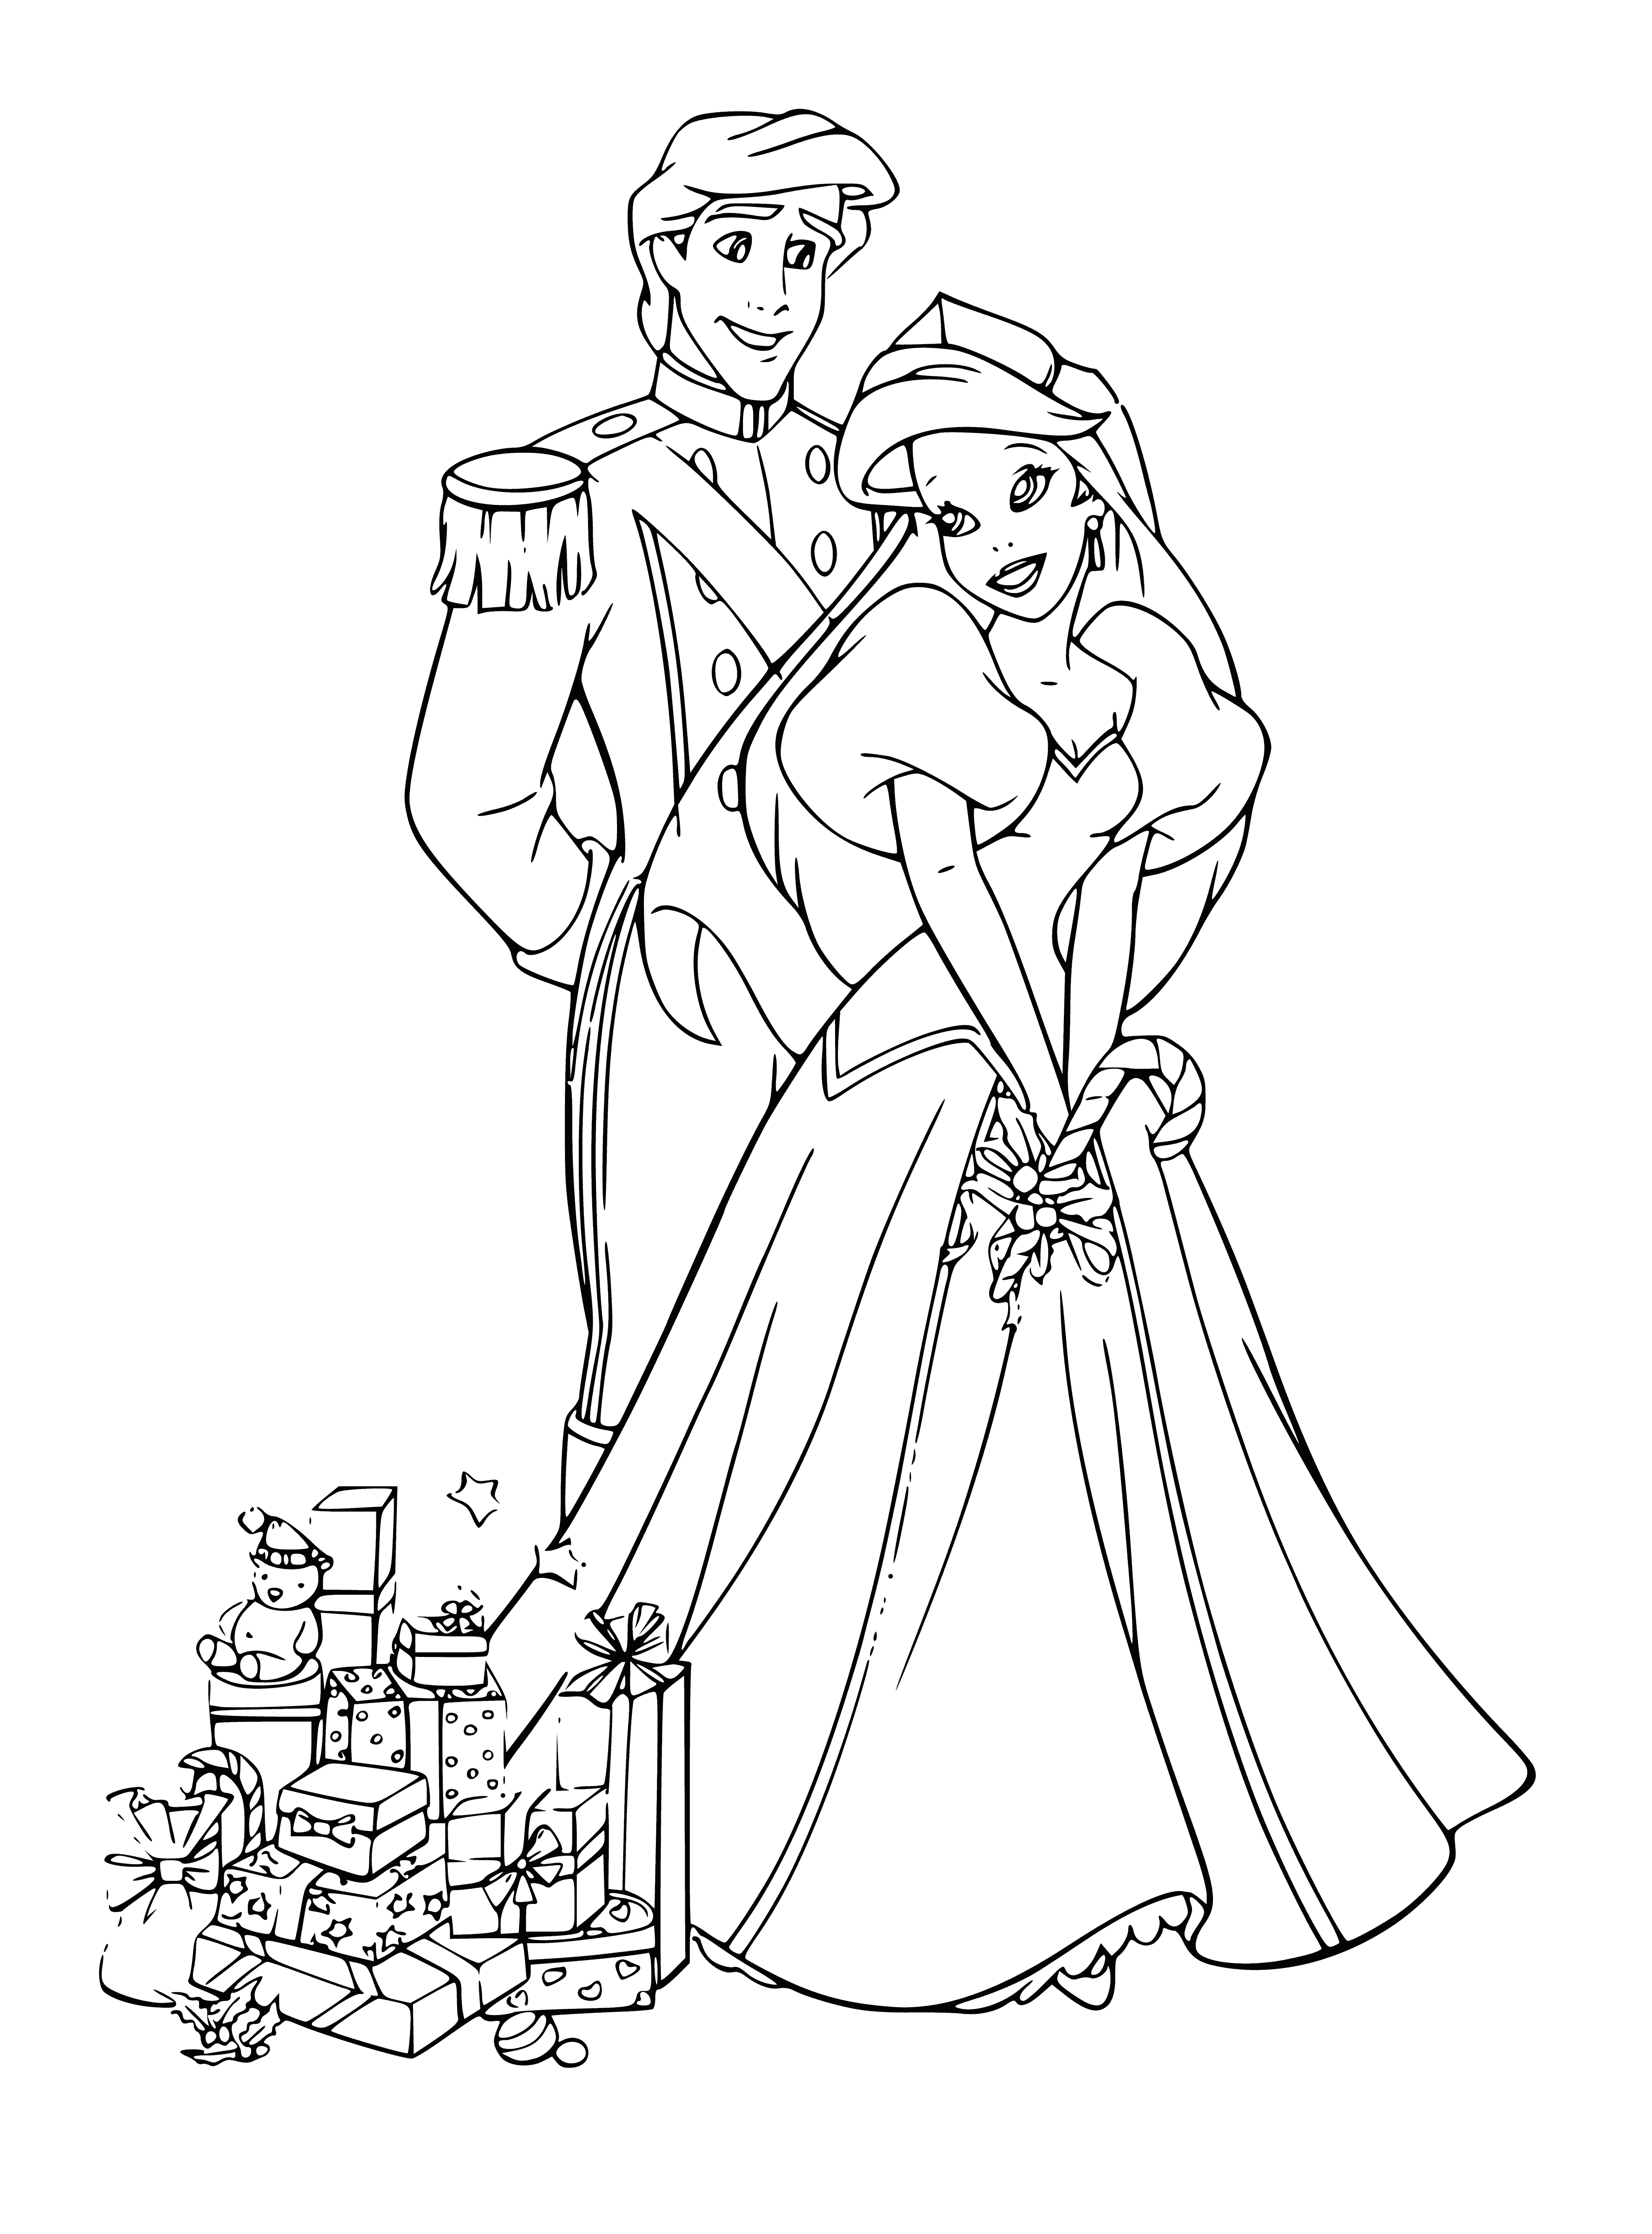 coloring page: Ariel & Prince Eric share a romantic kiss as confetti & streamers fall, celebrating a happy New Year full of love. #happynewyear